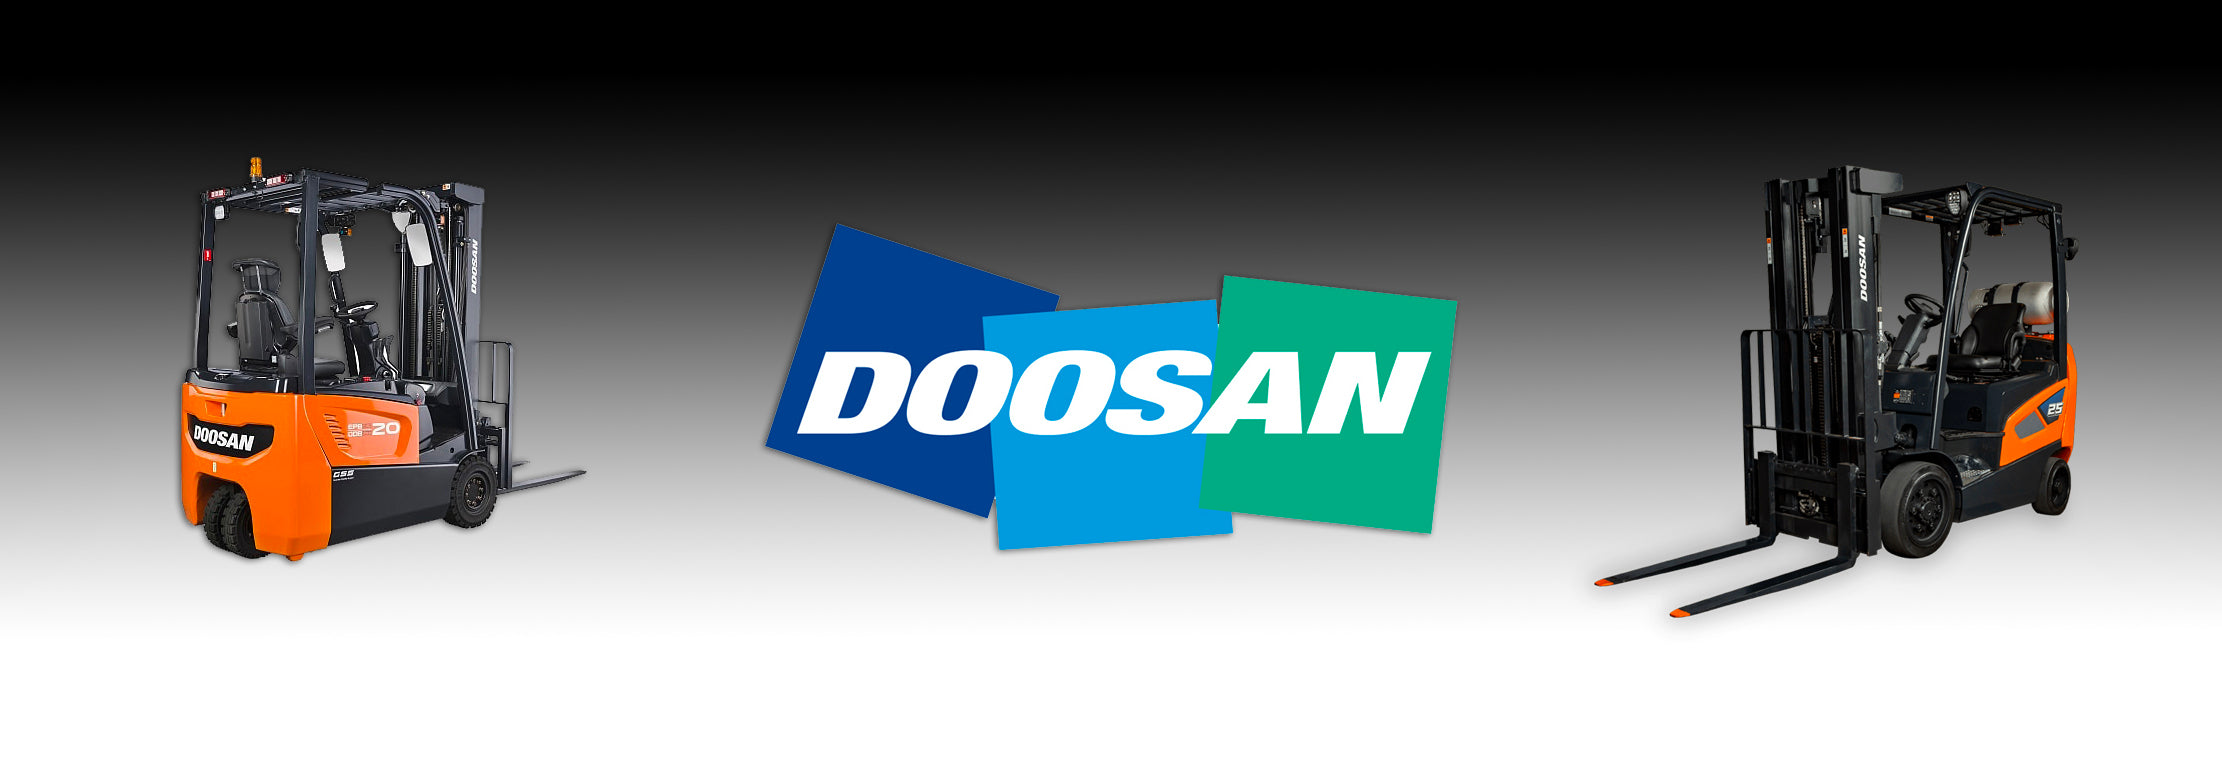 Doosan equipment tire covers tire socks tire boots drip diapers surface protection